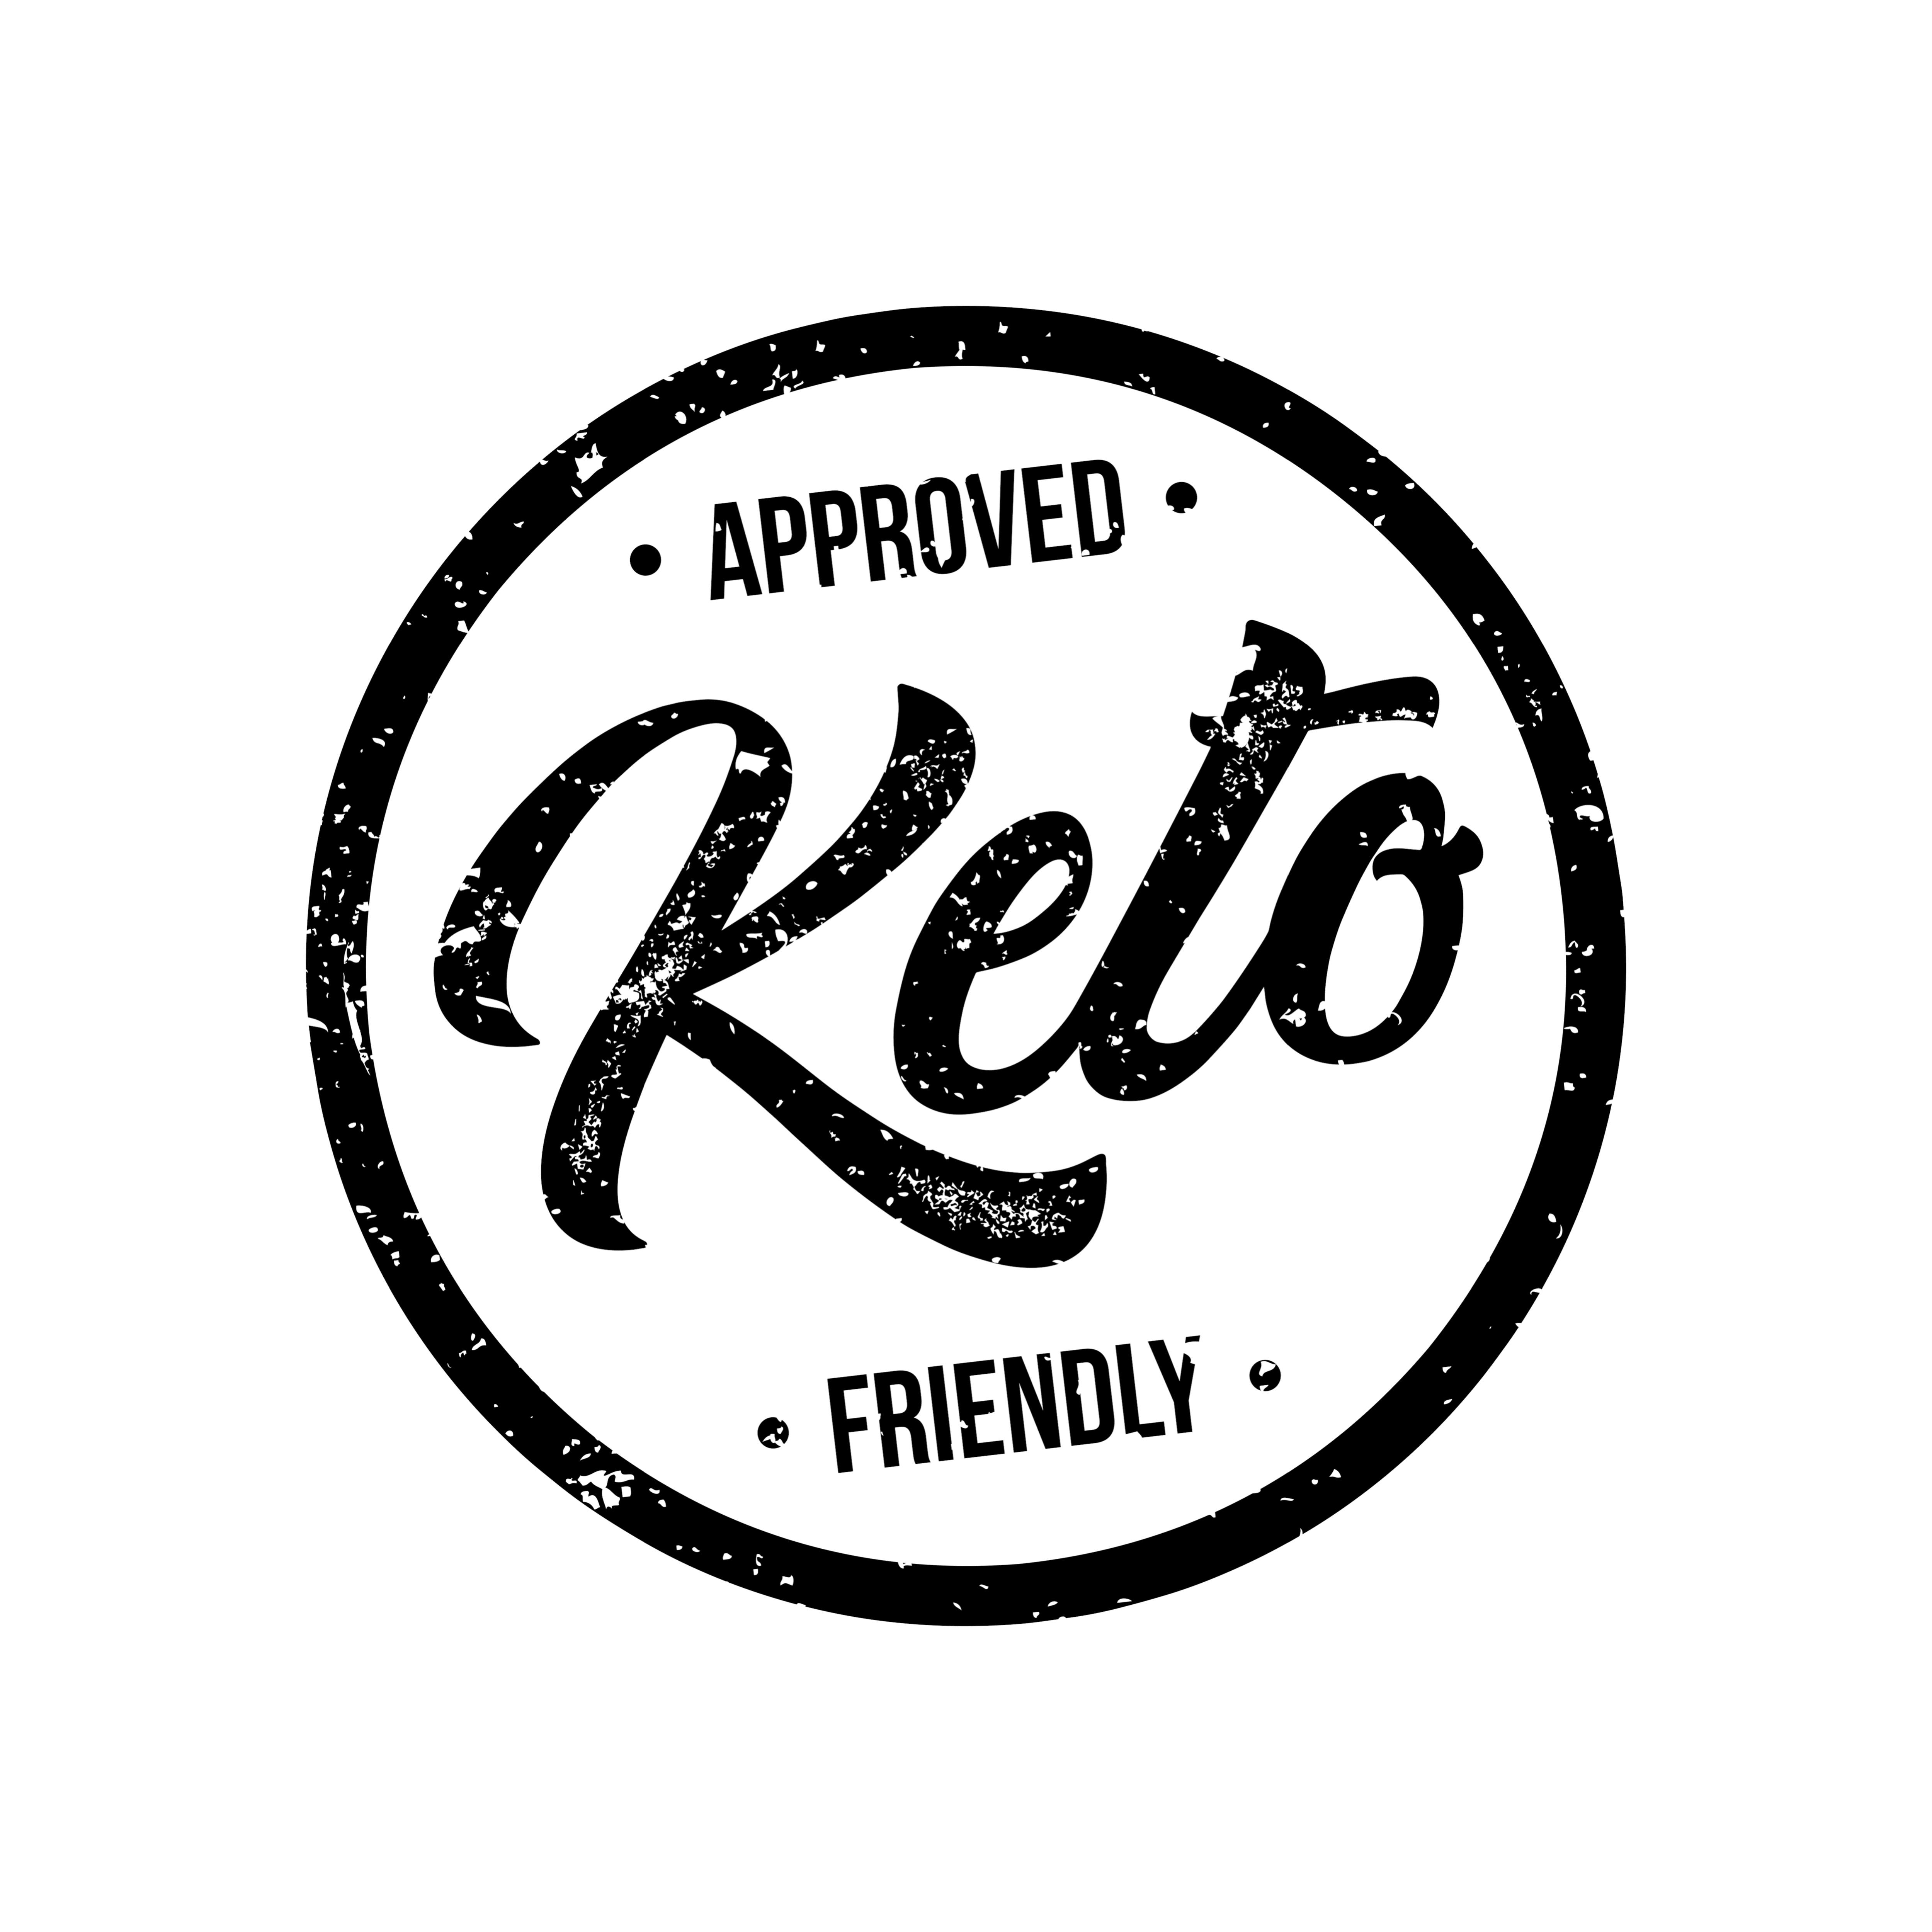 approved keto friendly stamp for the omaha bakery